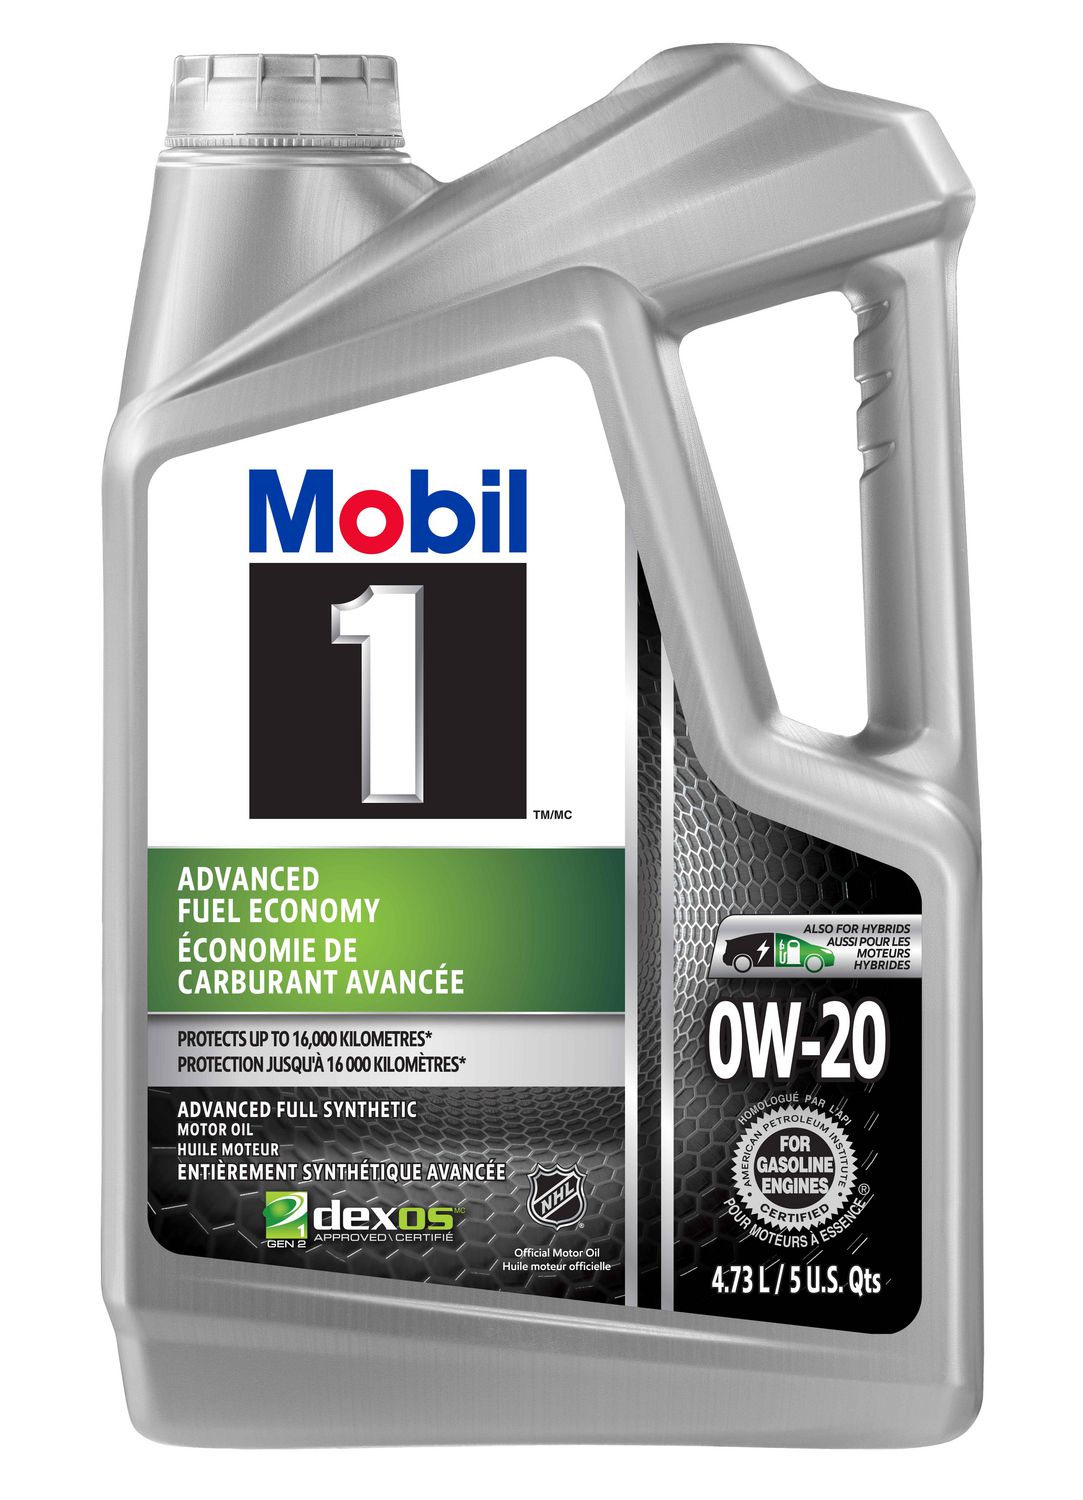 Mobil 1™ Advanced Fuel Economy Full Synthetic Motor Oil 0W-20, 4.73 L,  Mobil 1™ AFE 0W-20